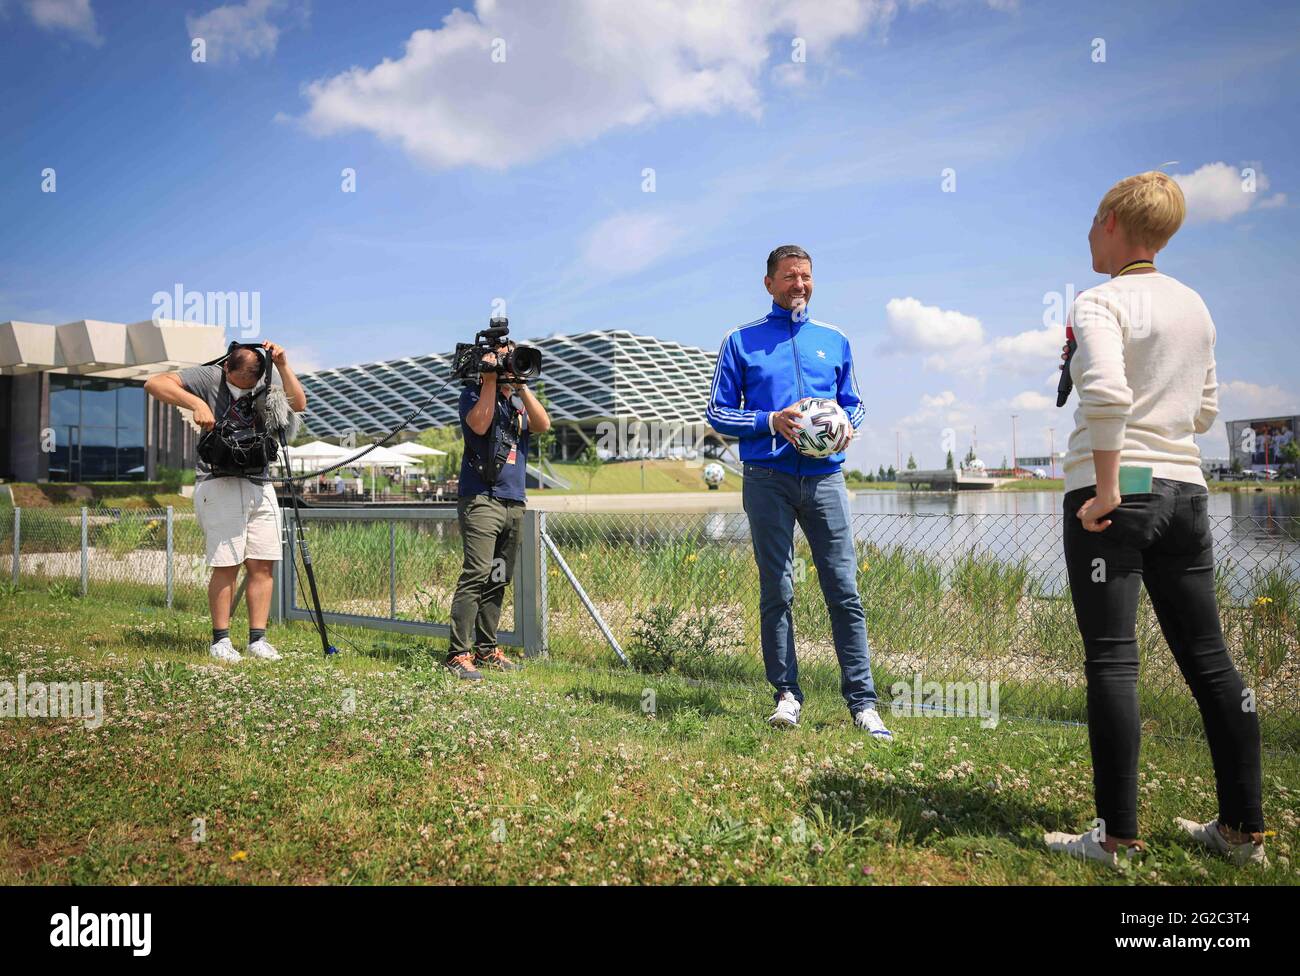 Herzogenaurach, Germany. 10th June, 2021. Kasper Rorsted (2nd from right),  CEO of Adidas AG, holds an official EURO 2020 "Uniforia" match ball during  an interview in front of the DFB media centre